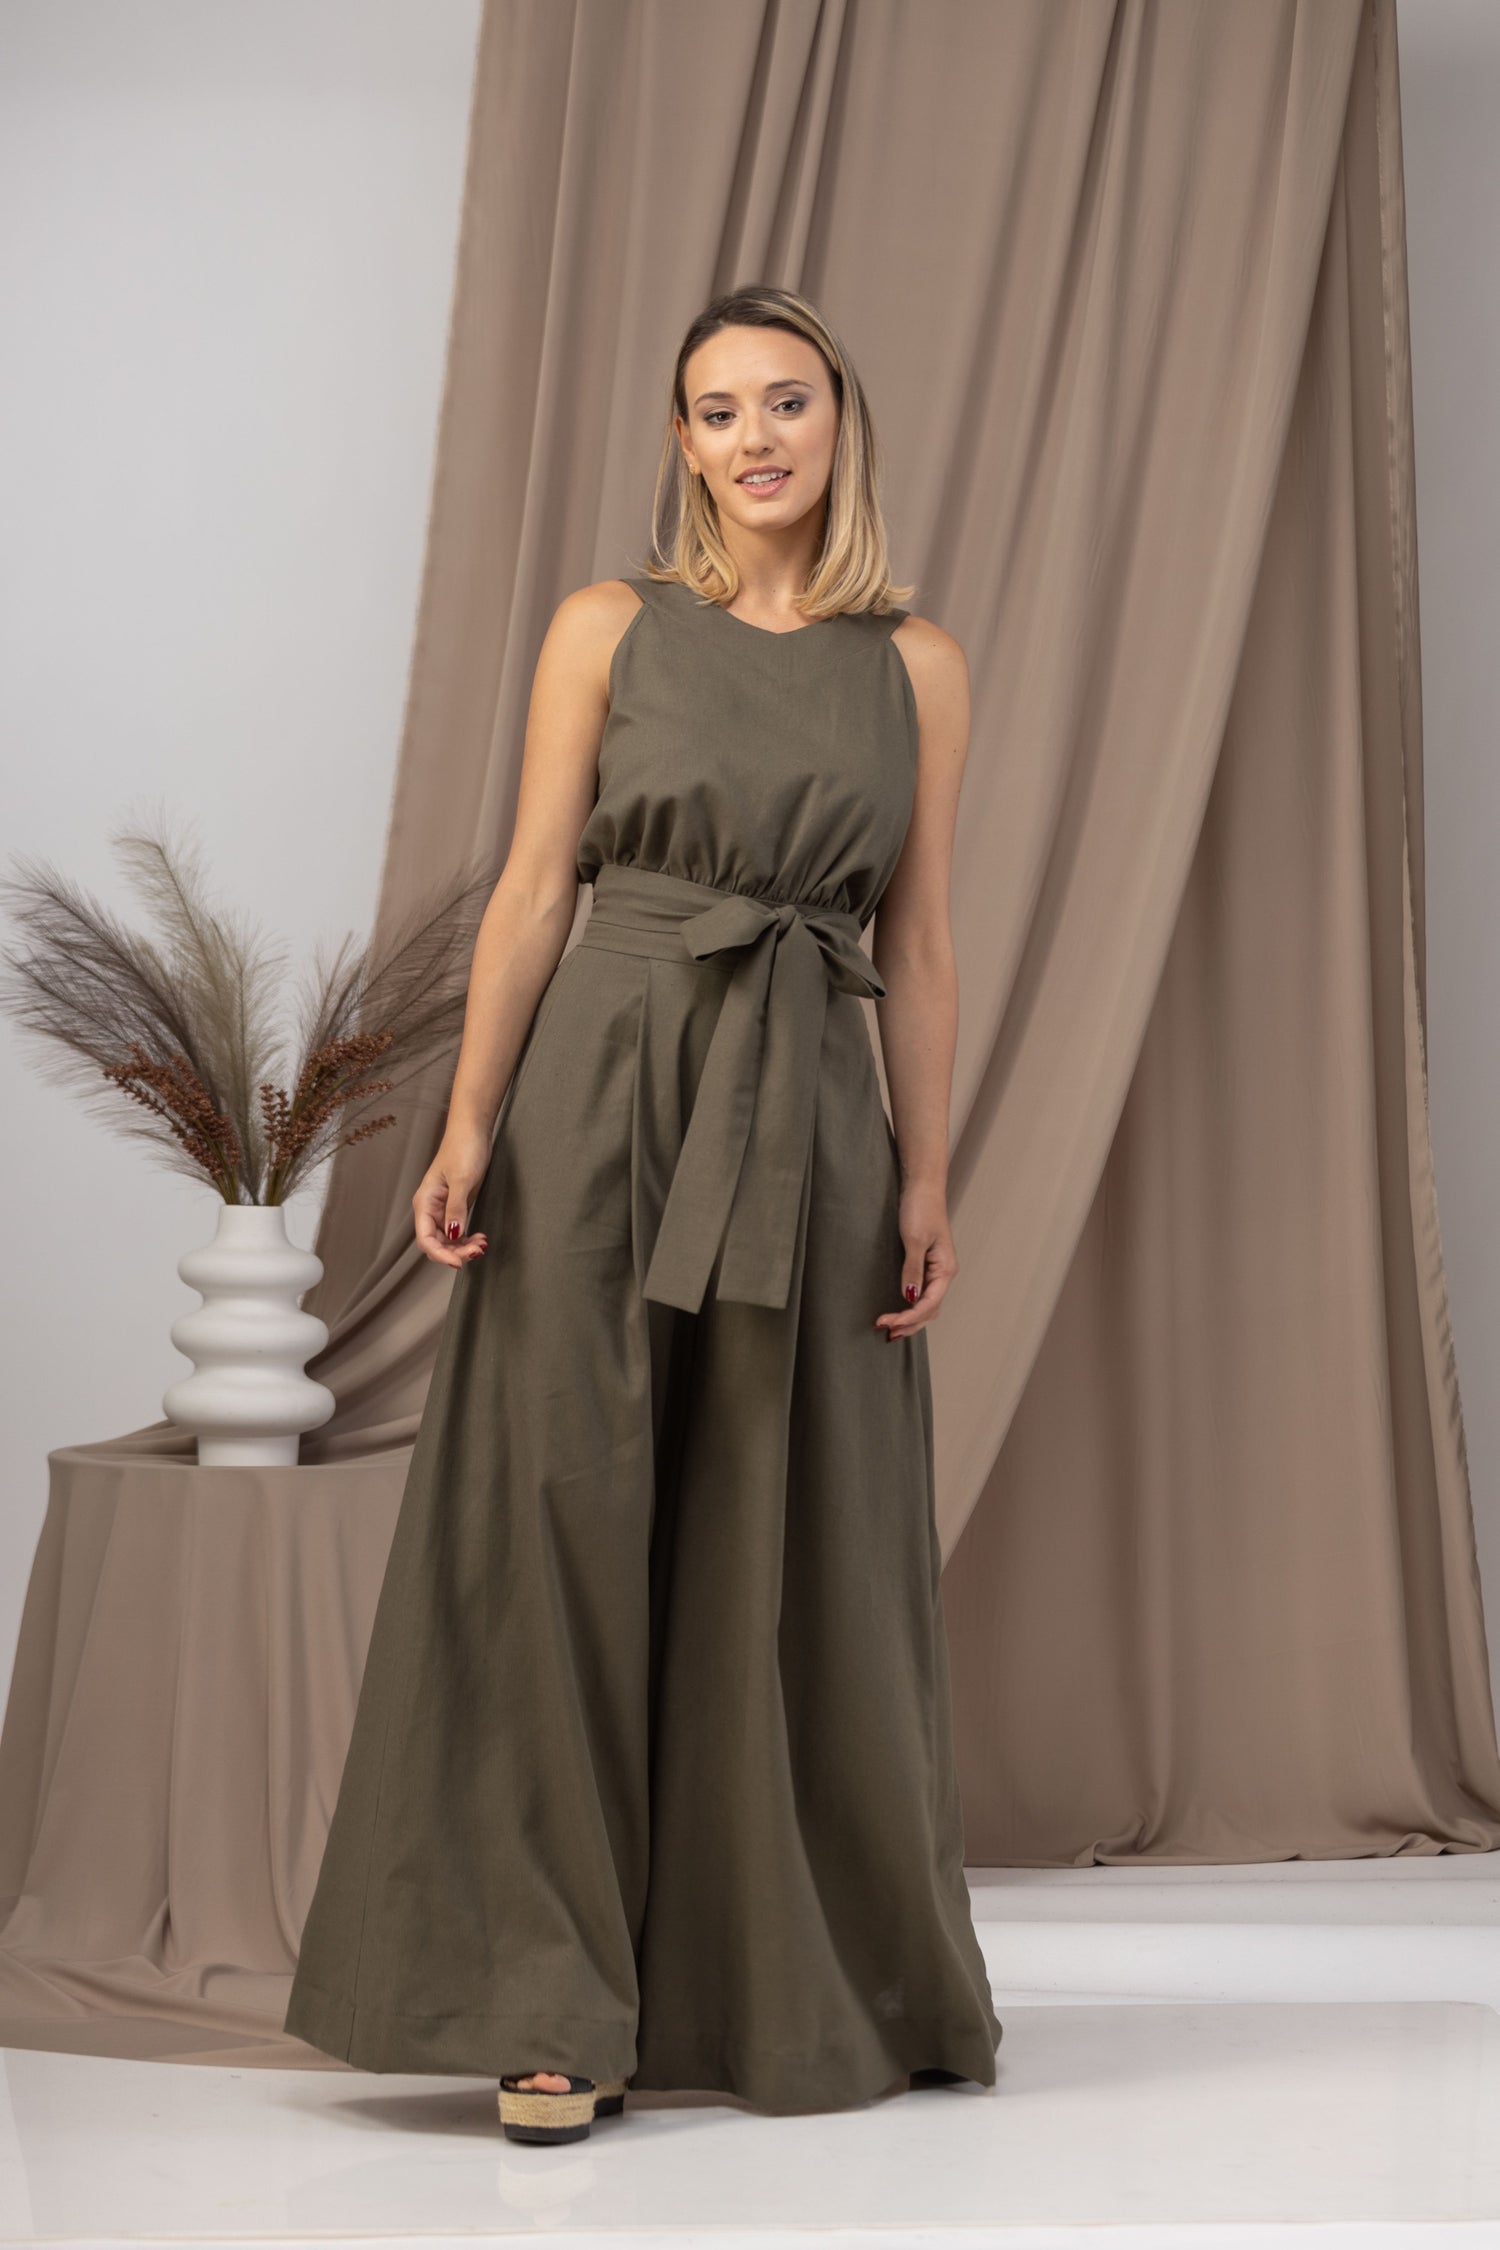 Sleeveless Linen Jumpsuit with Bow Belt from Nikka Place | Effortless fashion for easy living